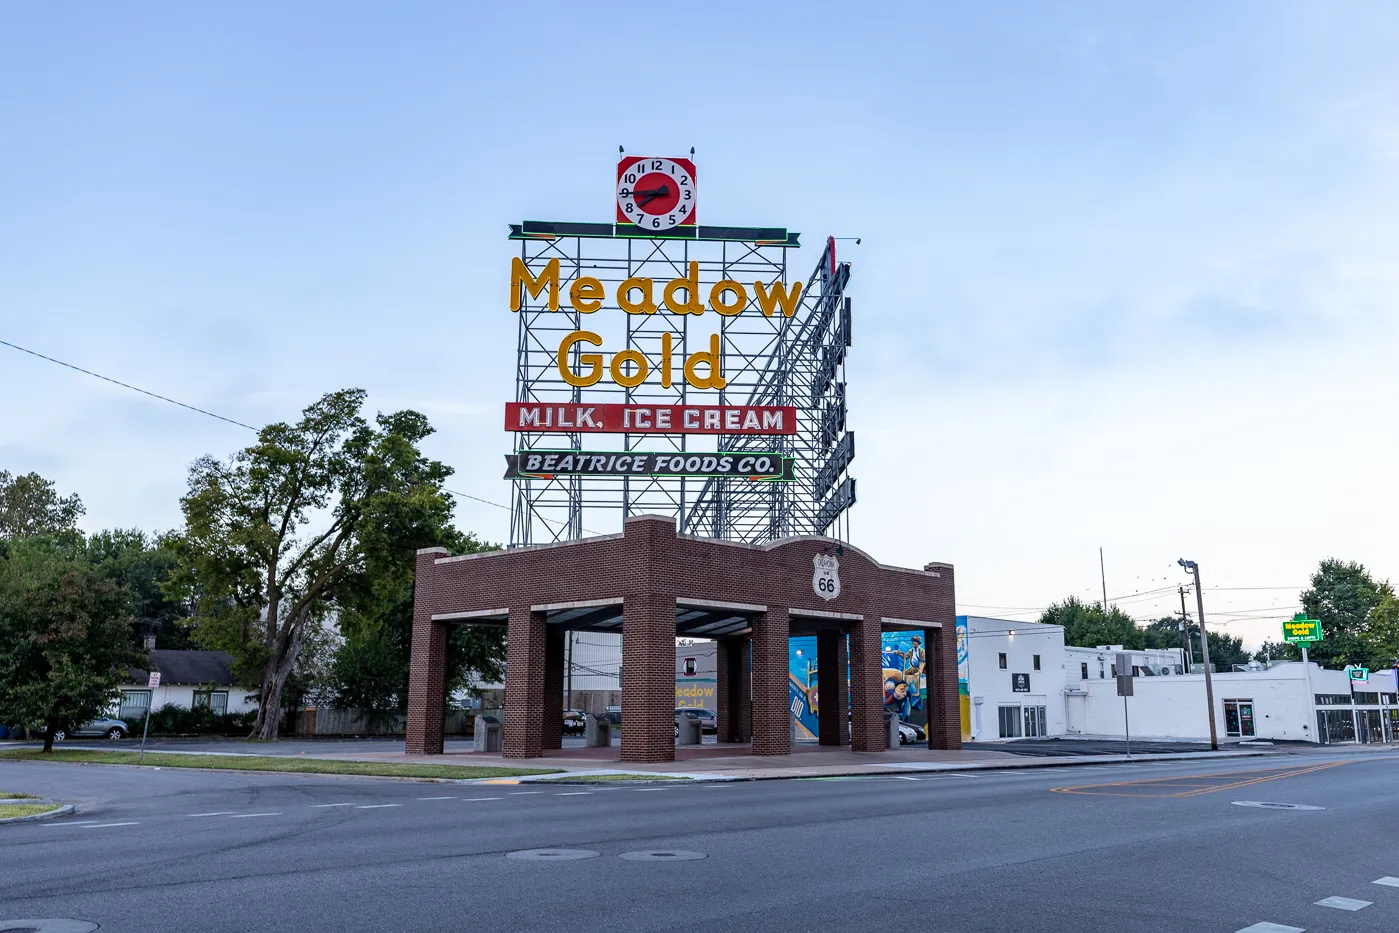 Meadow Gold Sign in Tulsa, Oklahoma Route 66 roadside attraction